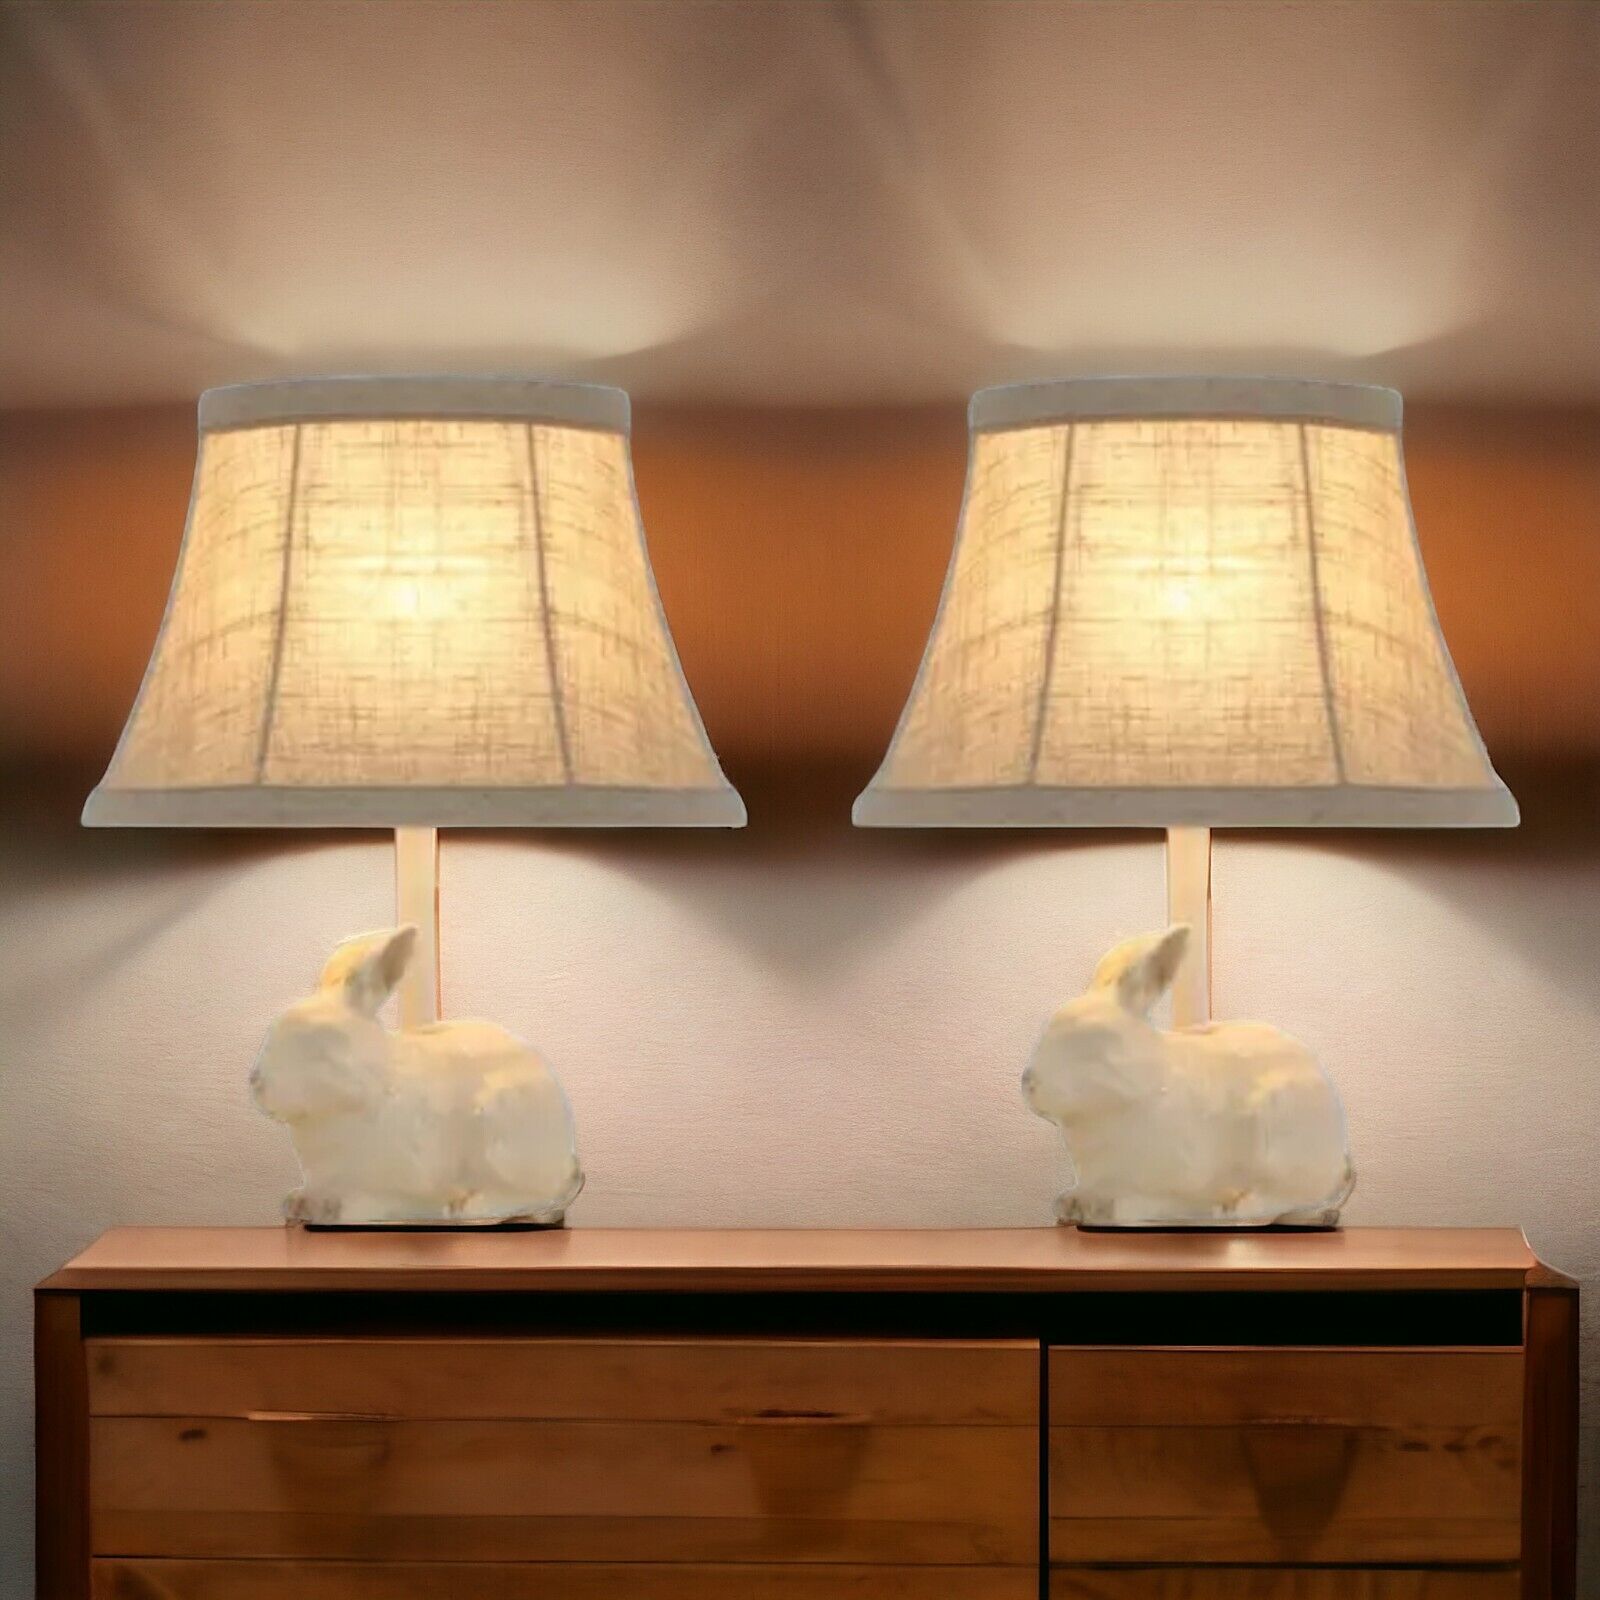 Bunny Rabbit Whimsy Pair: Charming Accent Lamp Duo